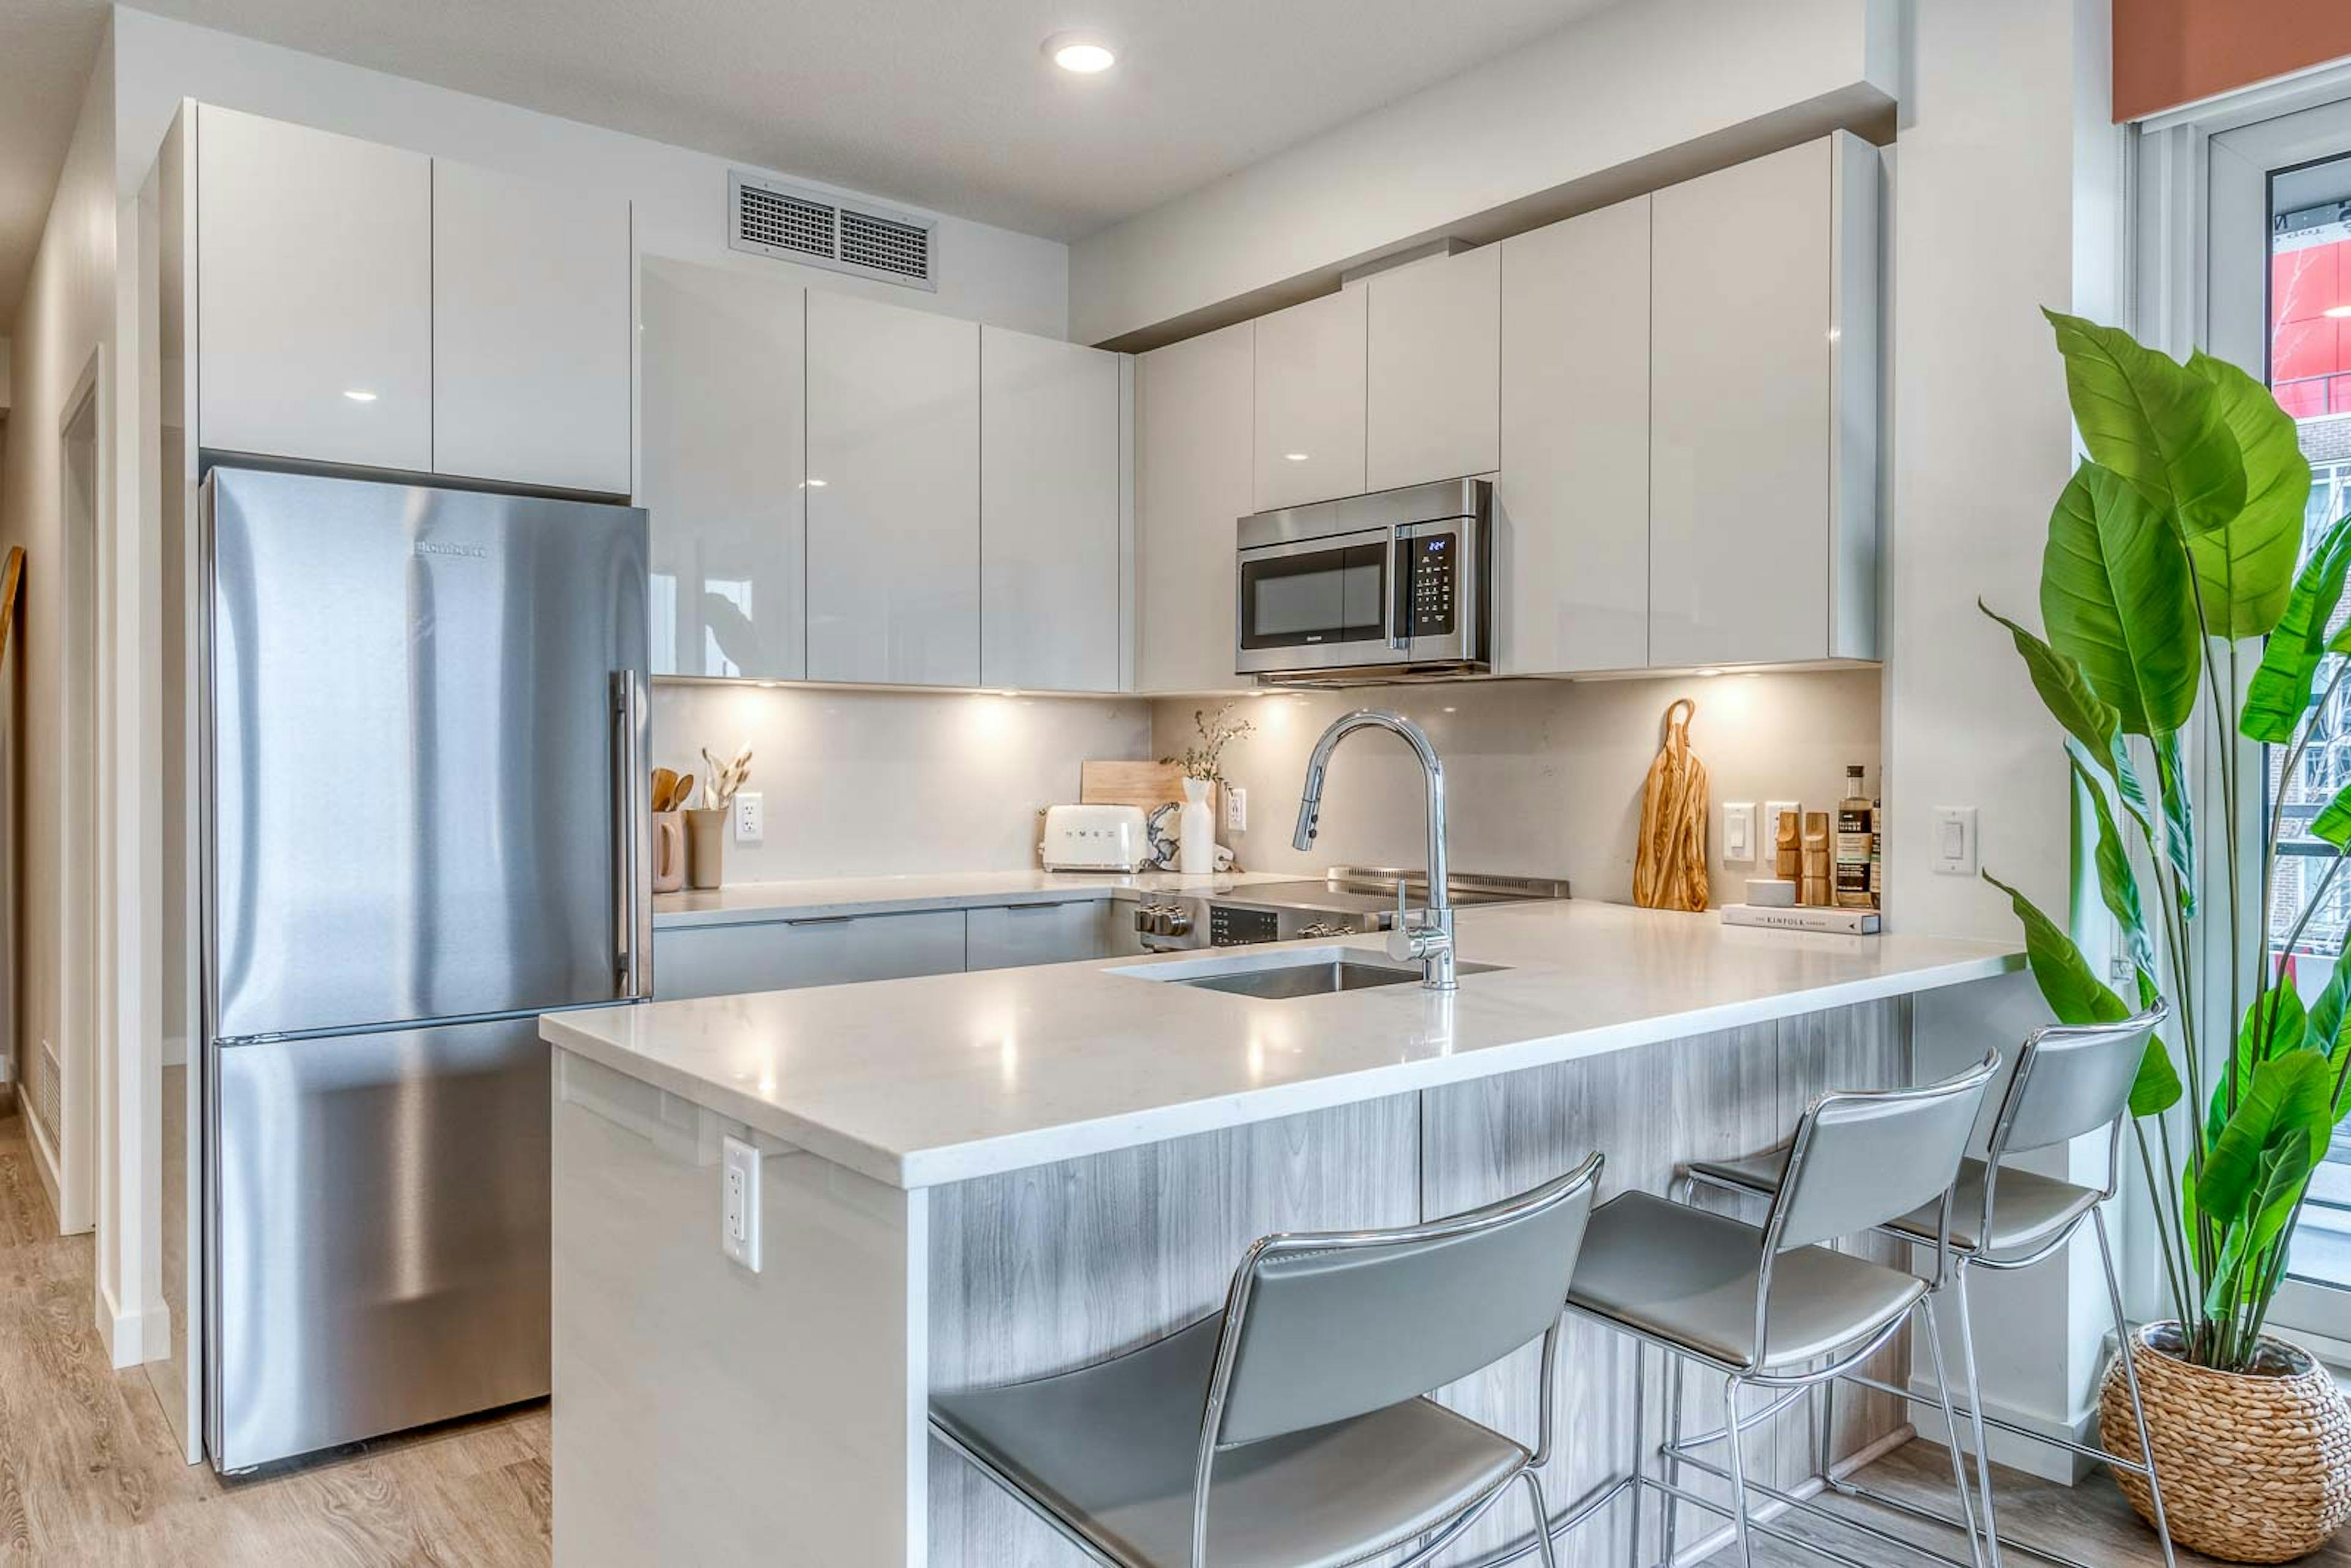 Dominion large 2 bedroom kitchen with modern cabinets, stainless steel appliances, quartz backsplash and counter tops. 